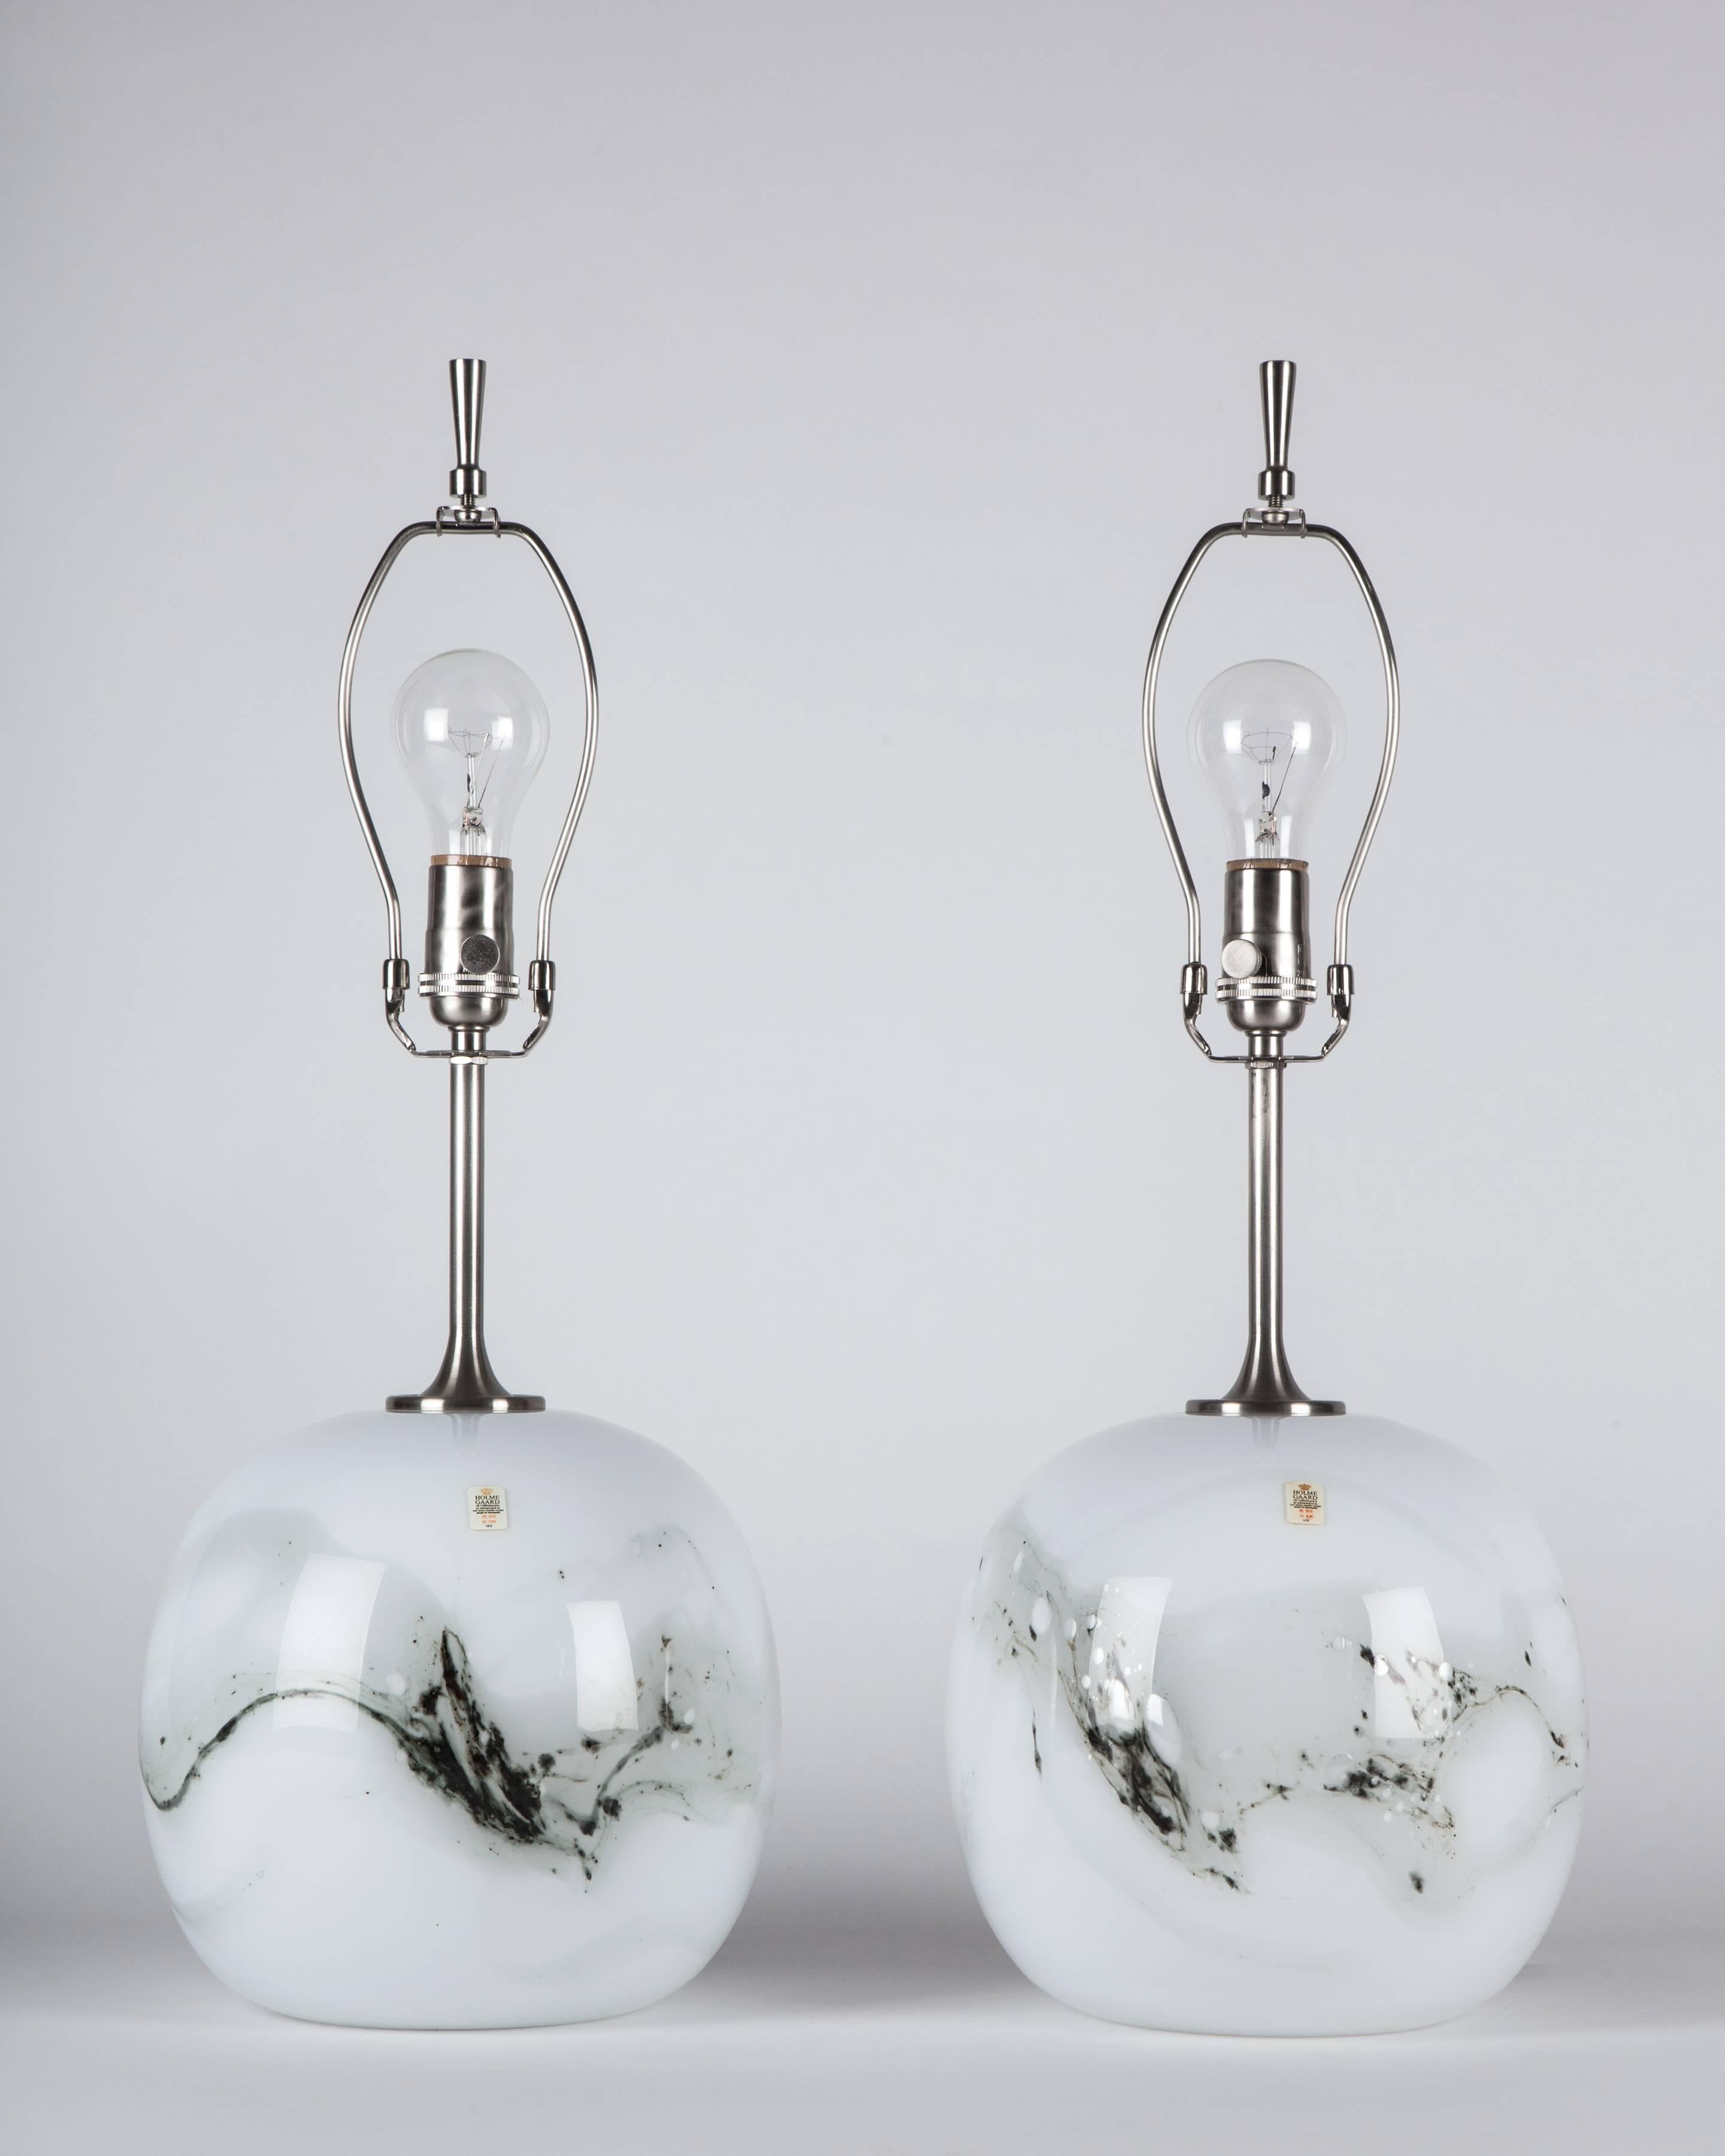 ATL1967
A pair of vintage cased white glass lamps with a black and grey design having satin nickel fittings. Designed by Michael Bang for the Danish maker Holmegaard. Due to the antique nature of this fixture, there may be some nicks or